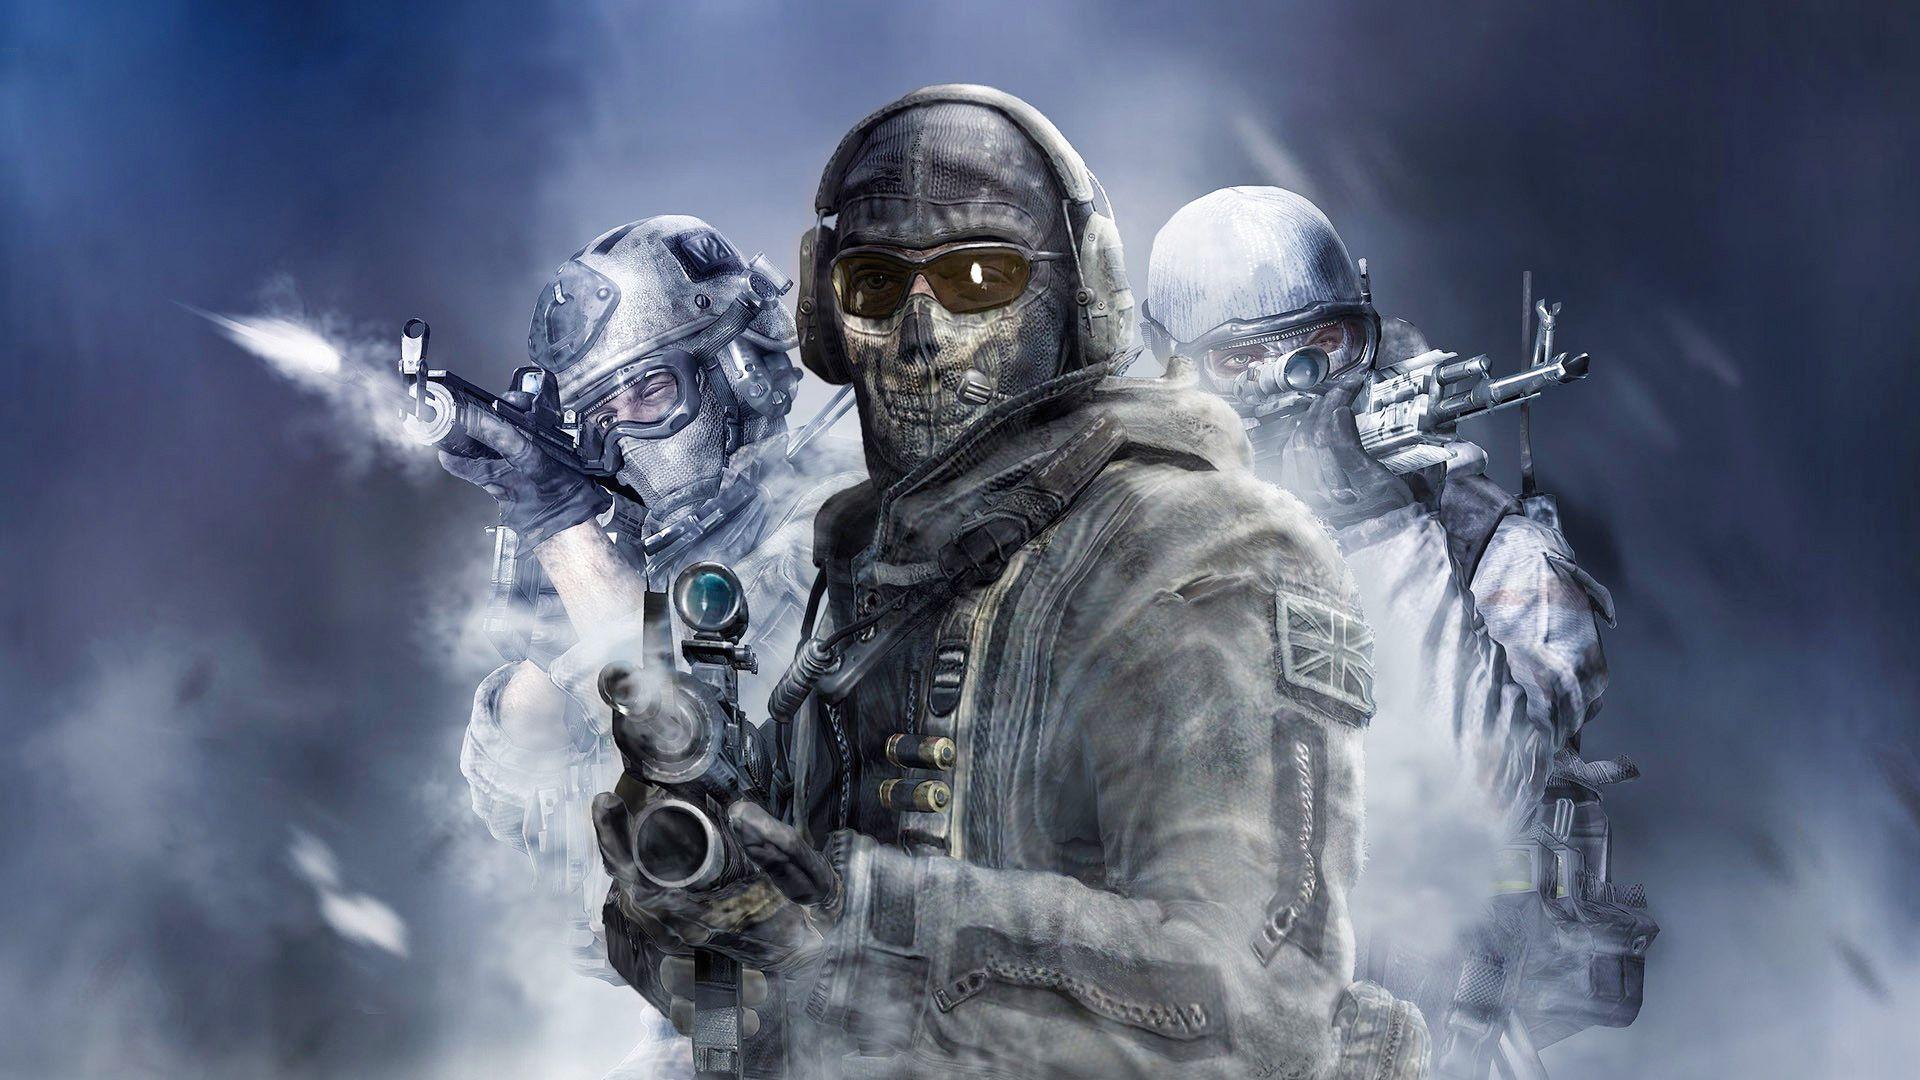 Call Of Duty Ghosts Wallpaper Awesome 1920x1080. Call Of Duty